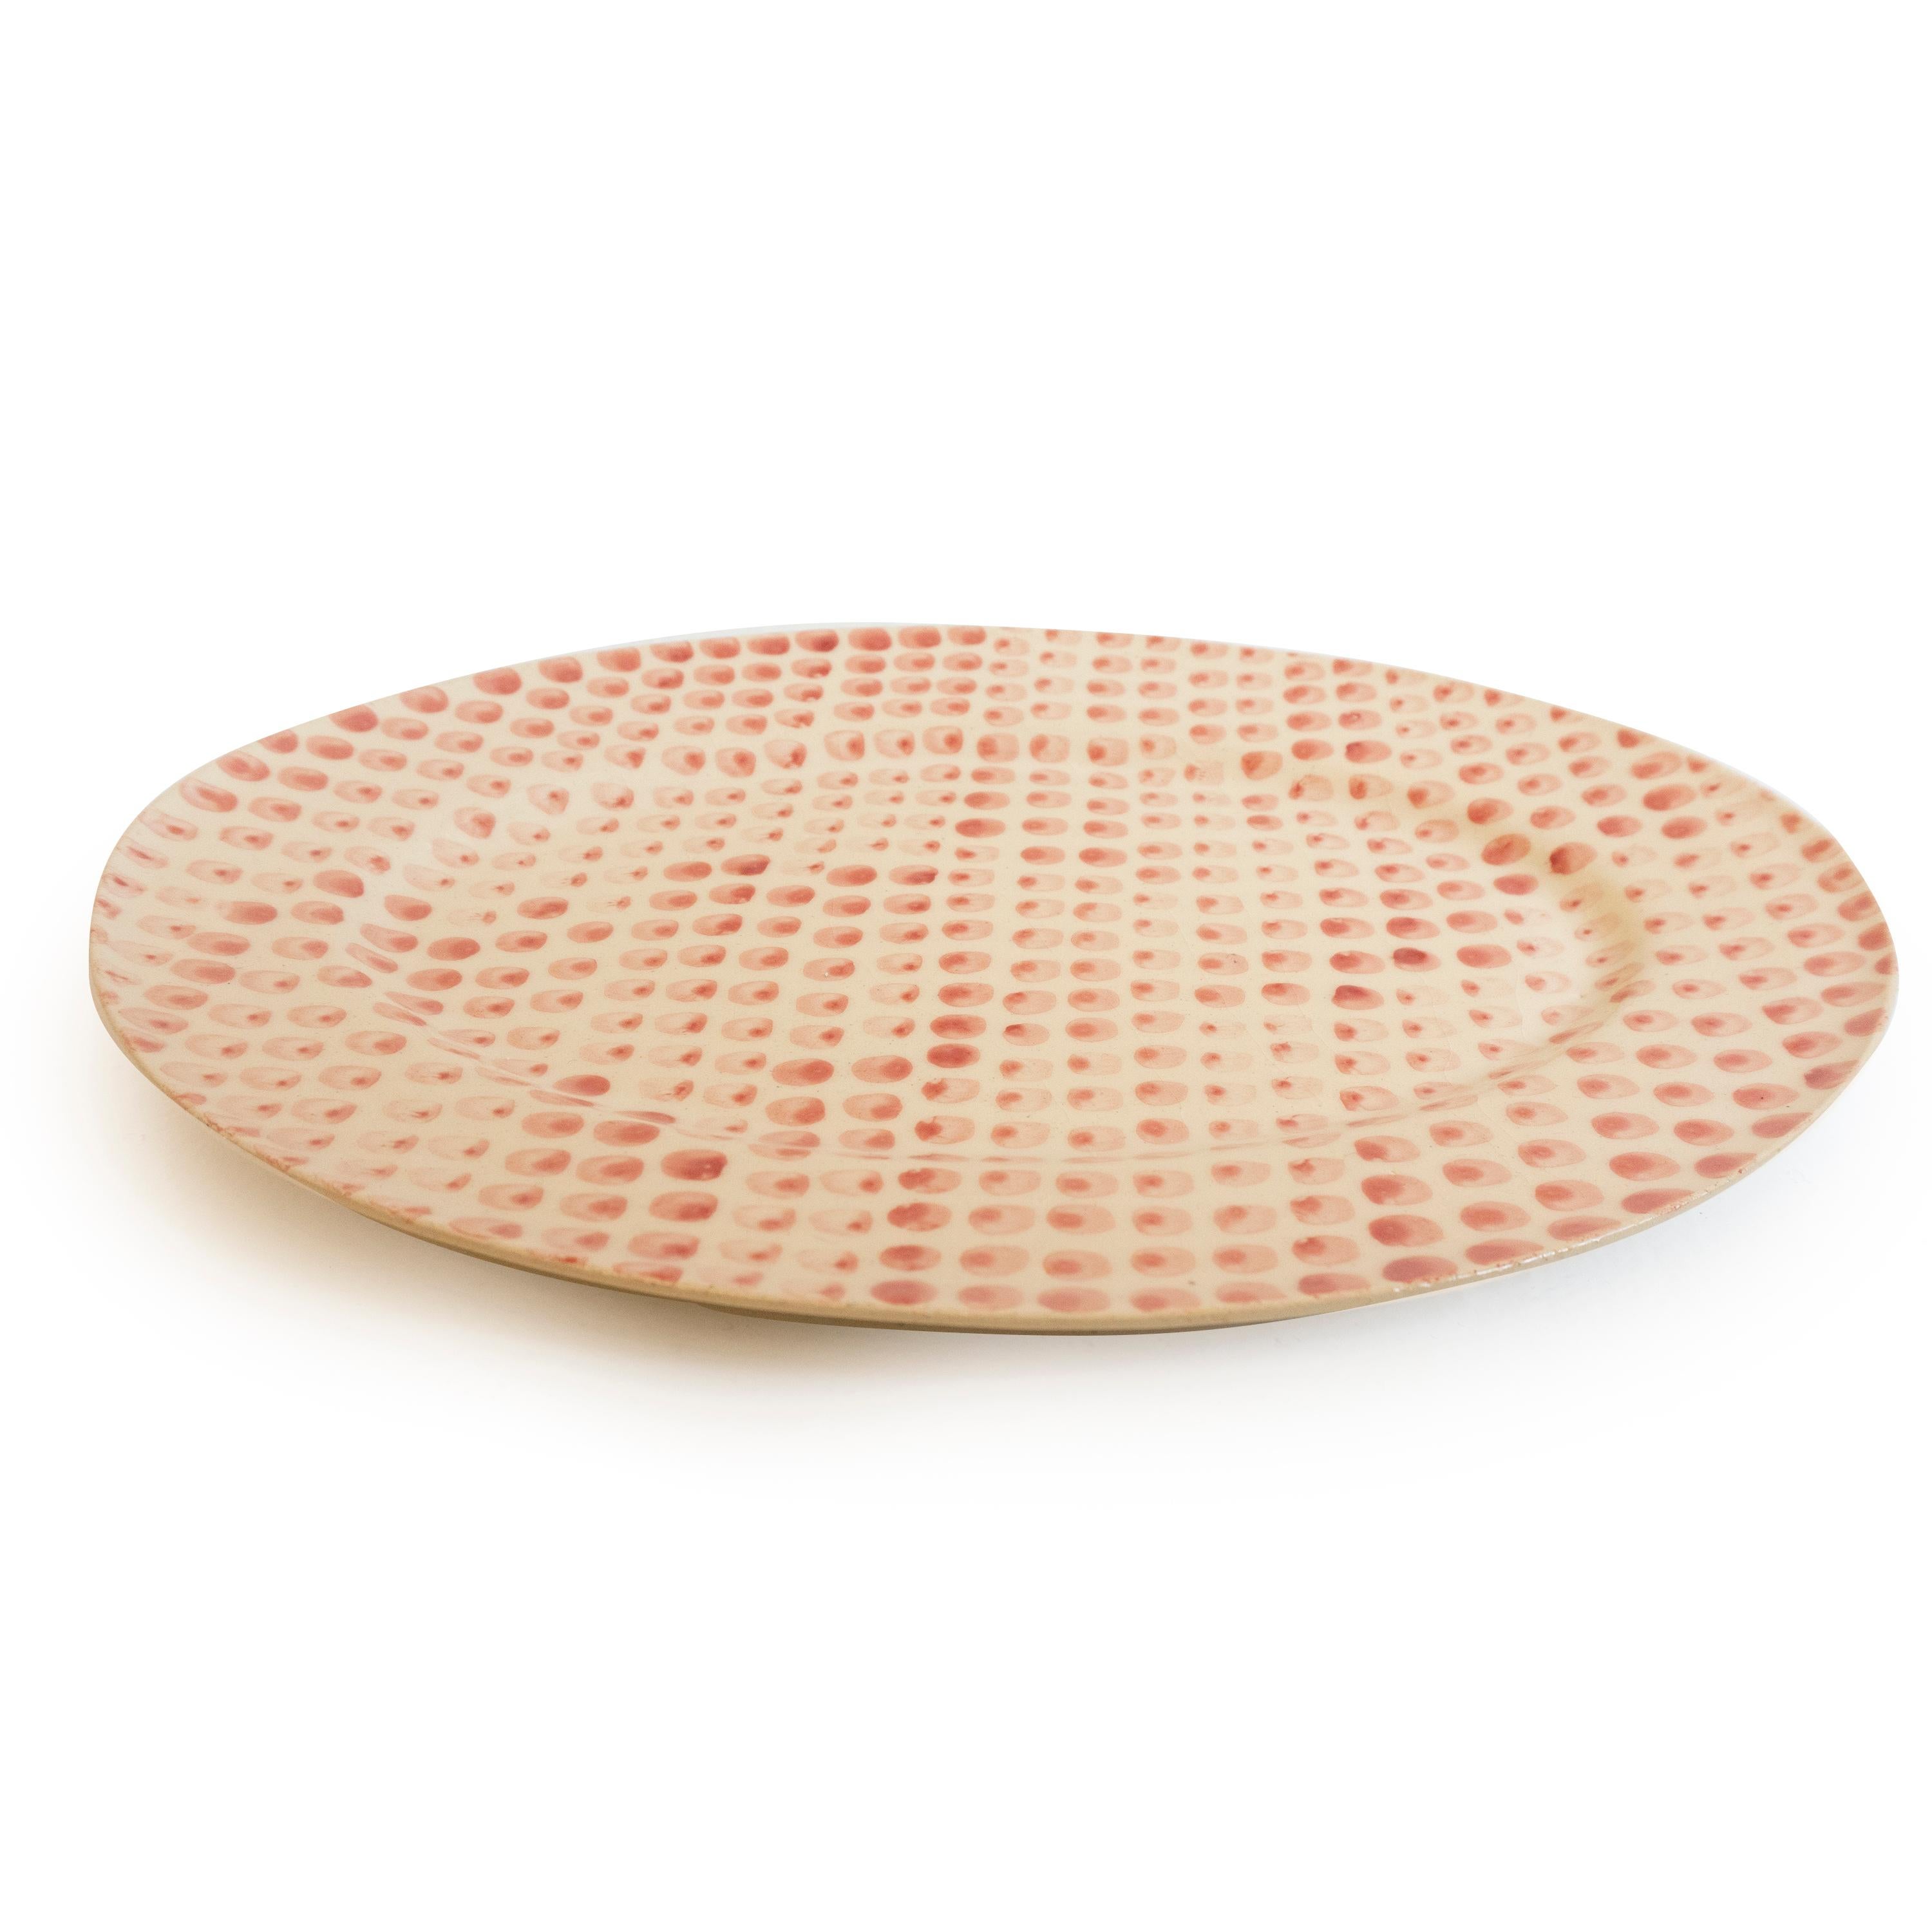 This handcrafted platter is handmade in Paris, France. From the hand beating of the clay to the drawn illustration each platter is meticulously crafted. This platter is made from natural clay resulting in slightly different hues from one piece to